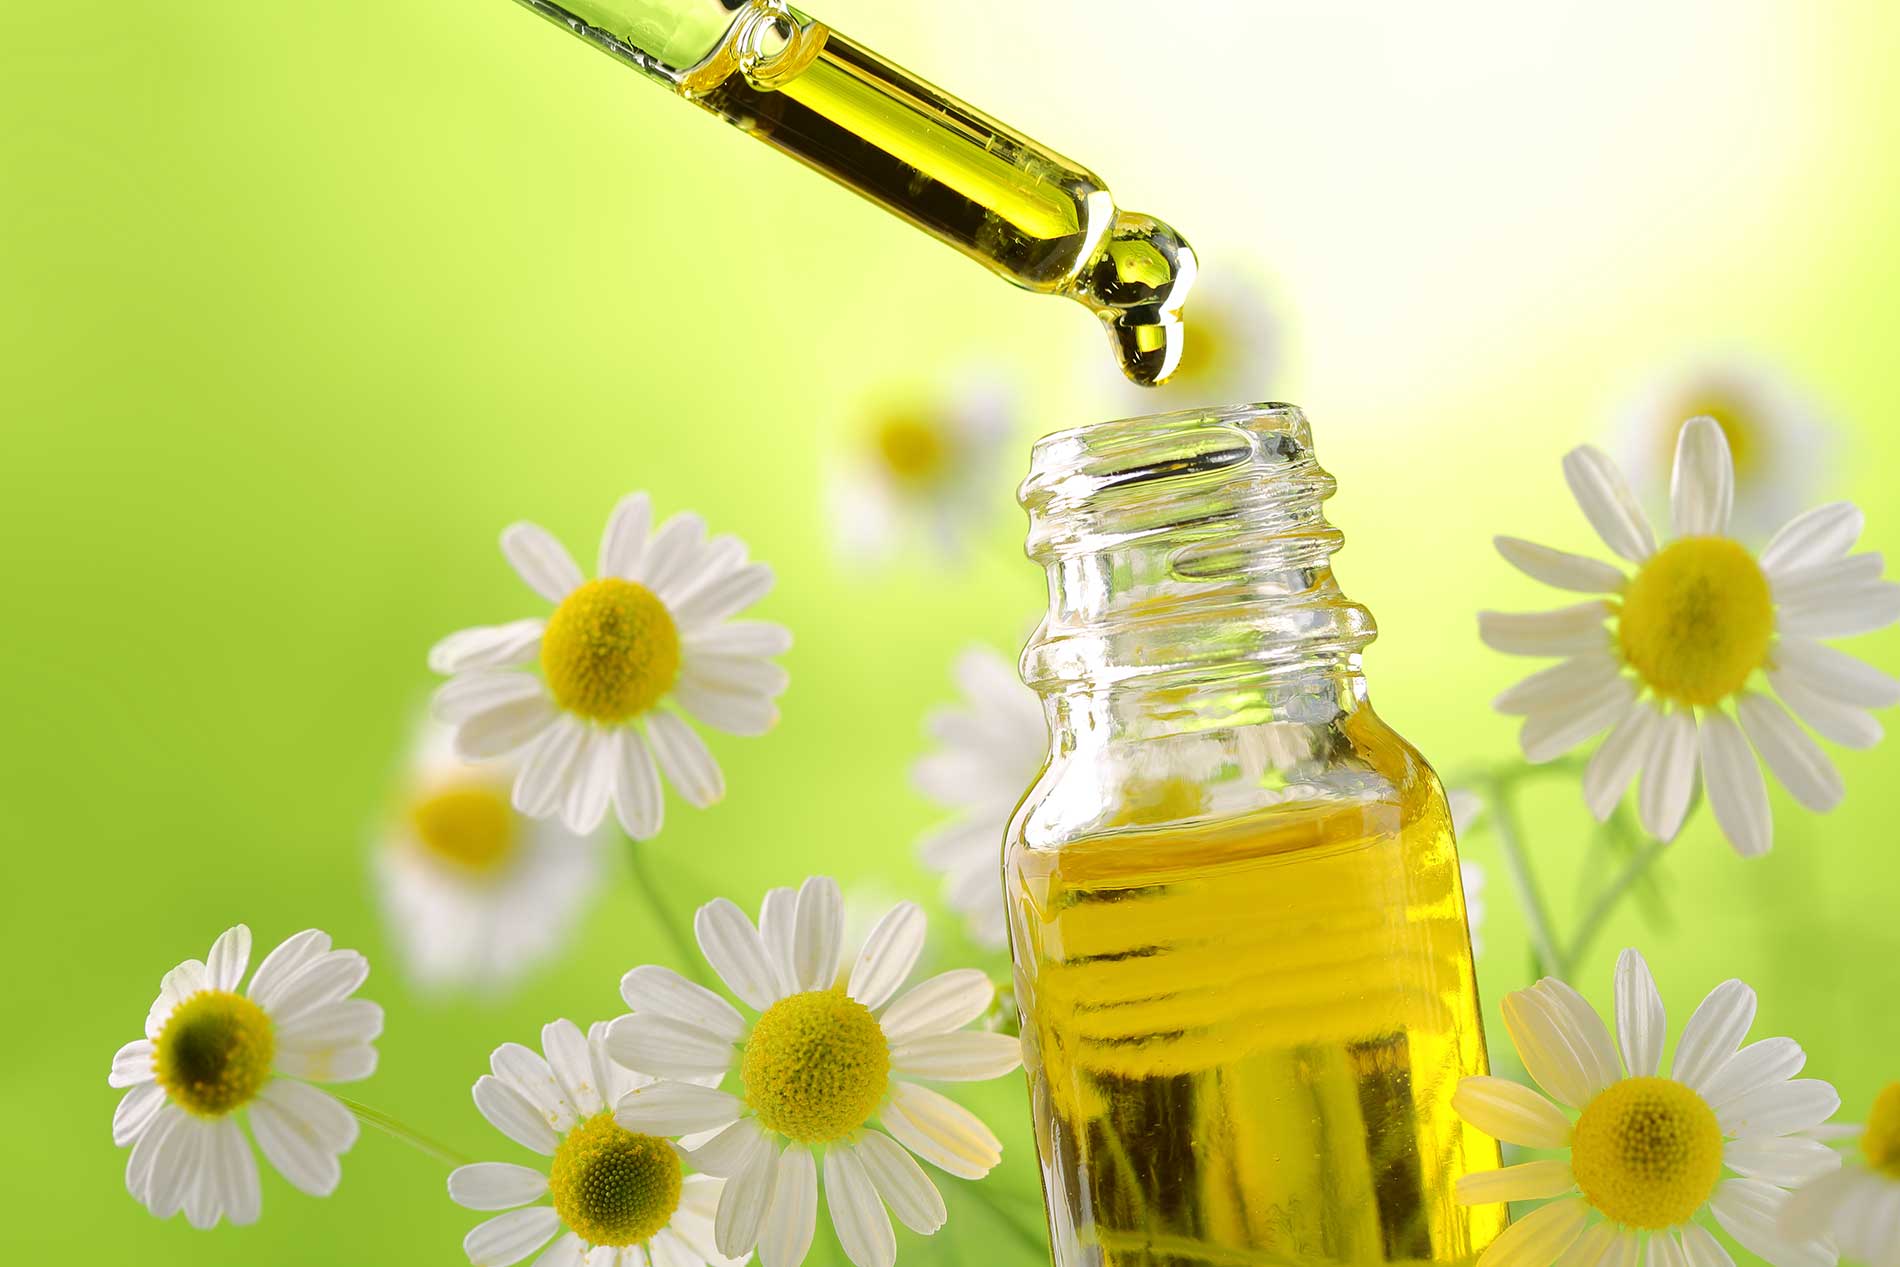 Caring For and Storing Your Essential Oils